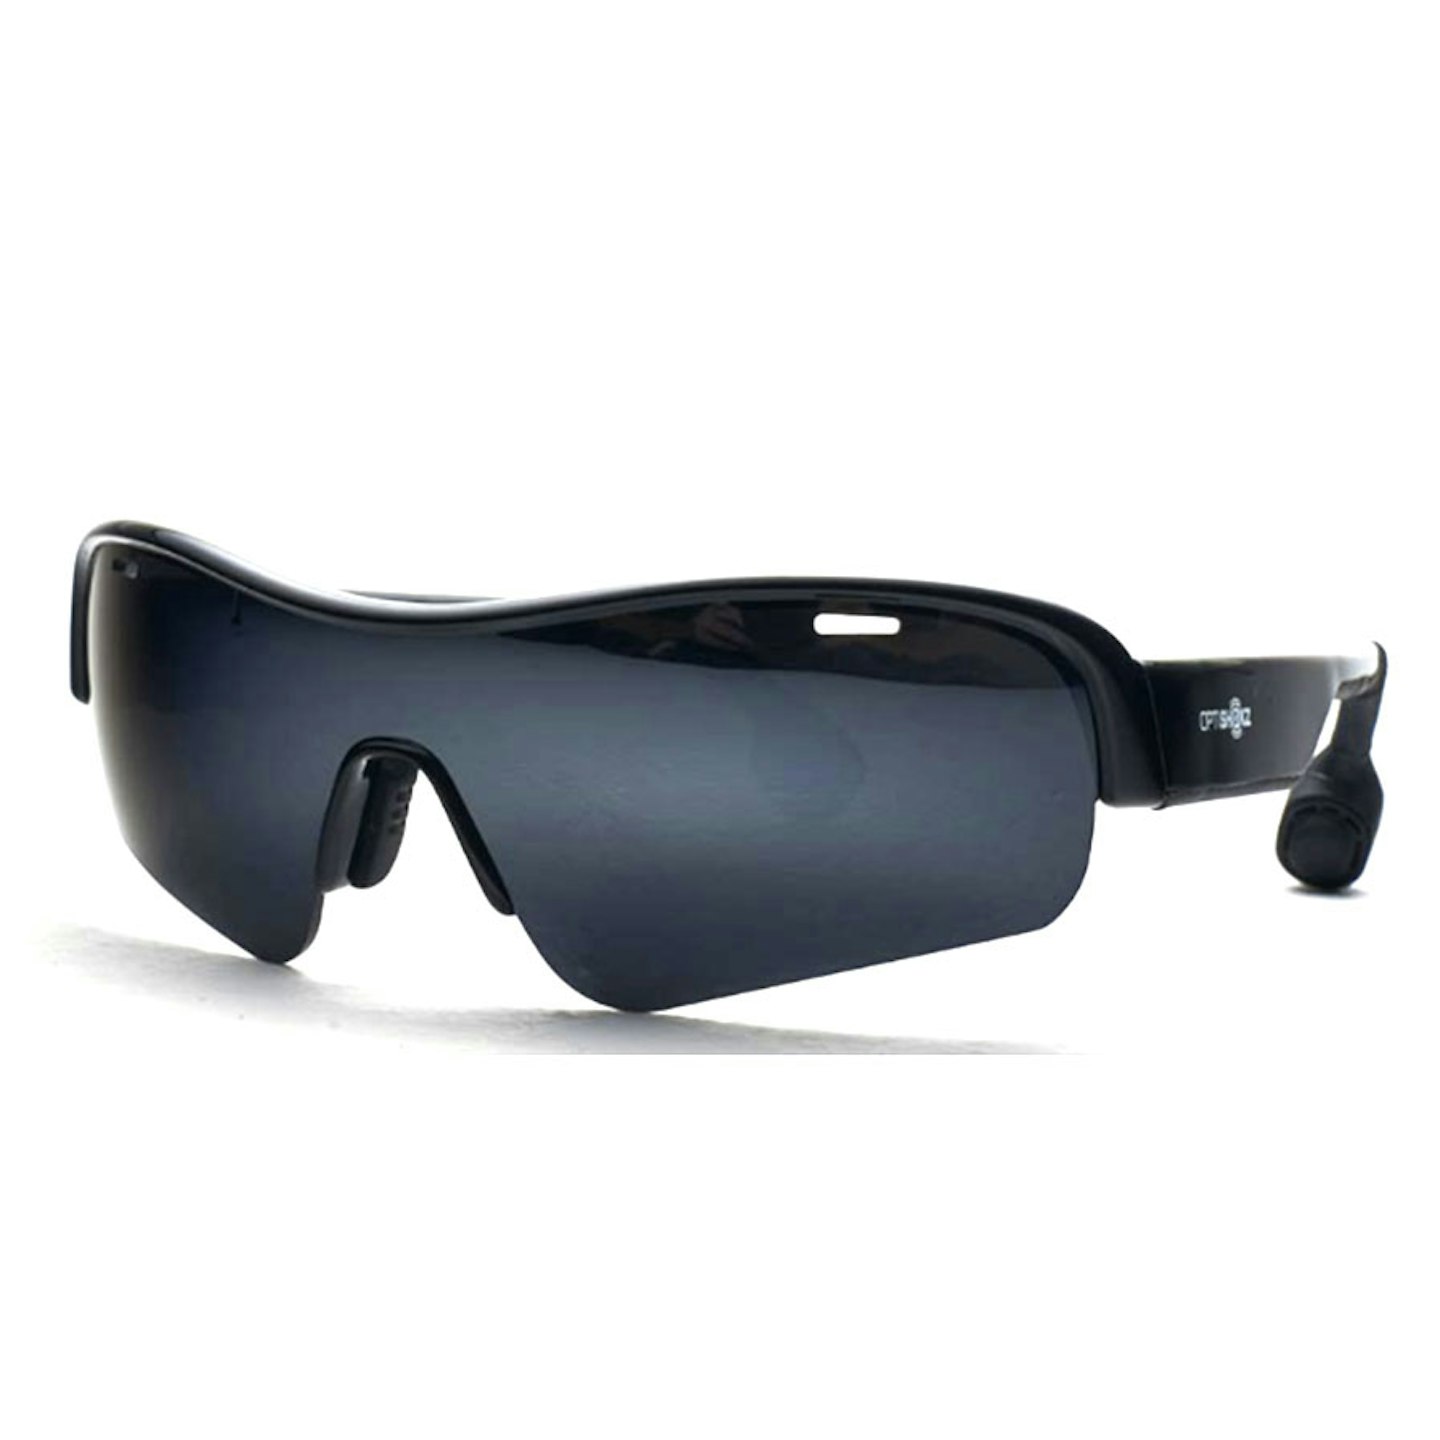 Best Sports Sunglasses Fitness Whats The Best